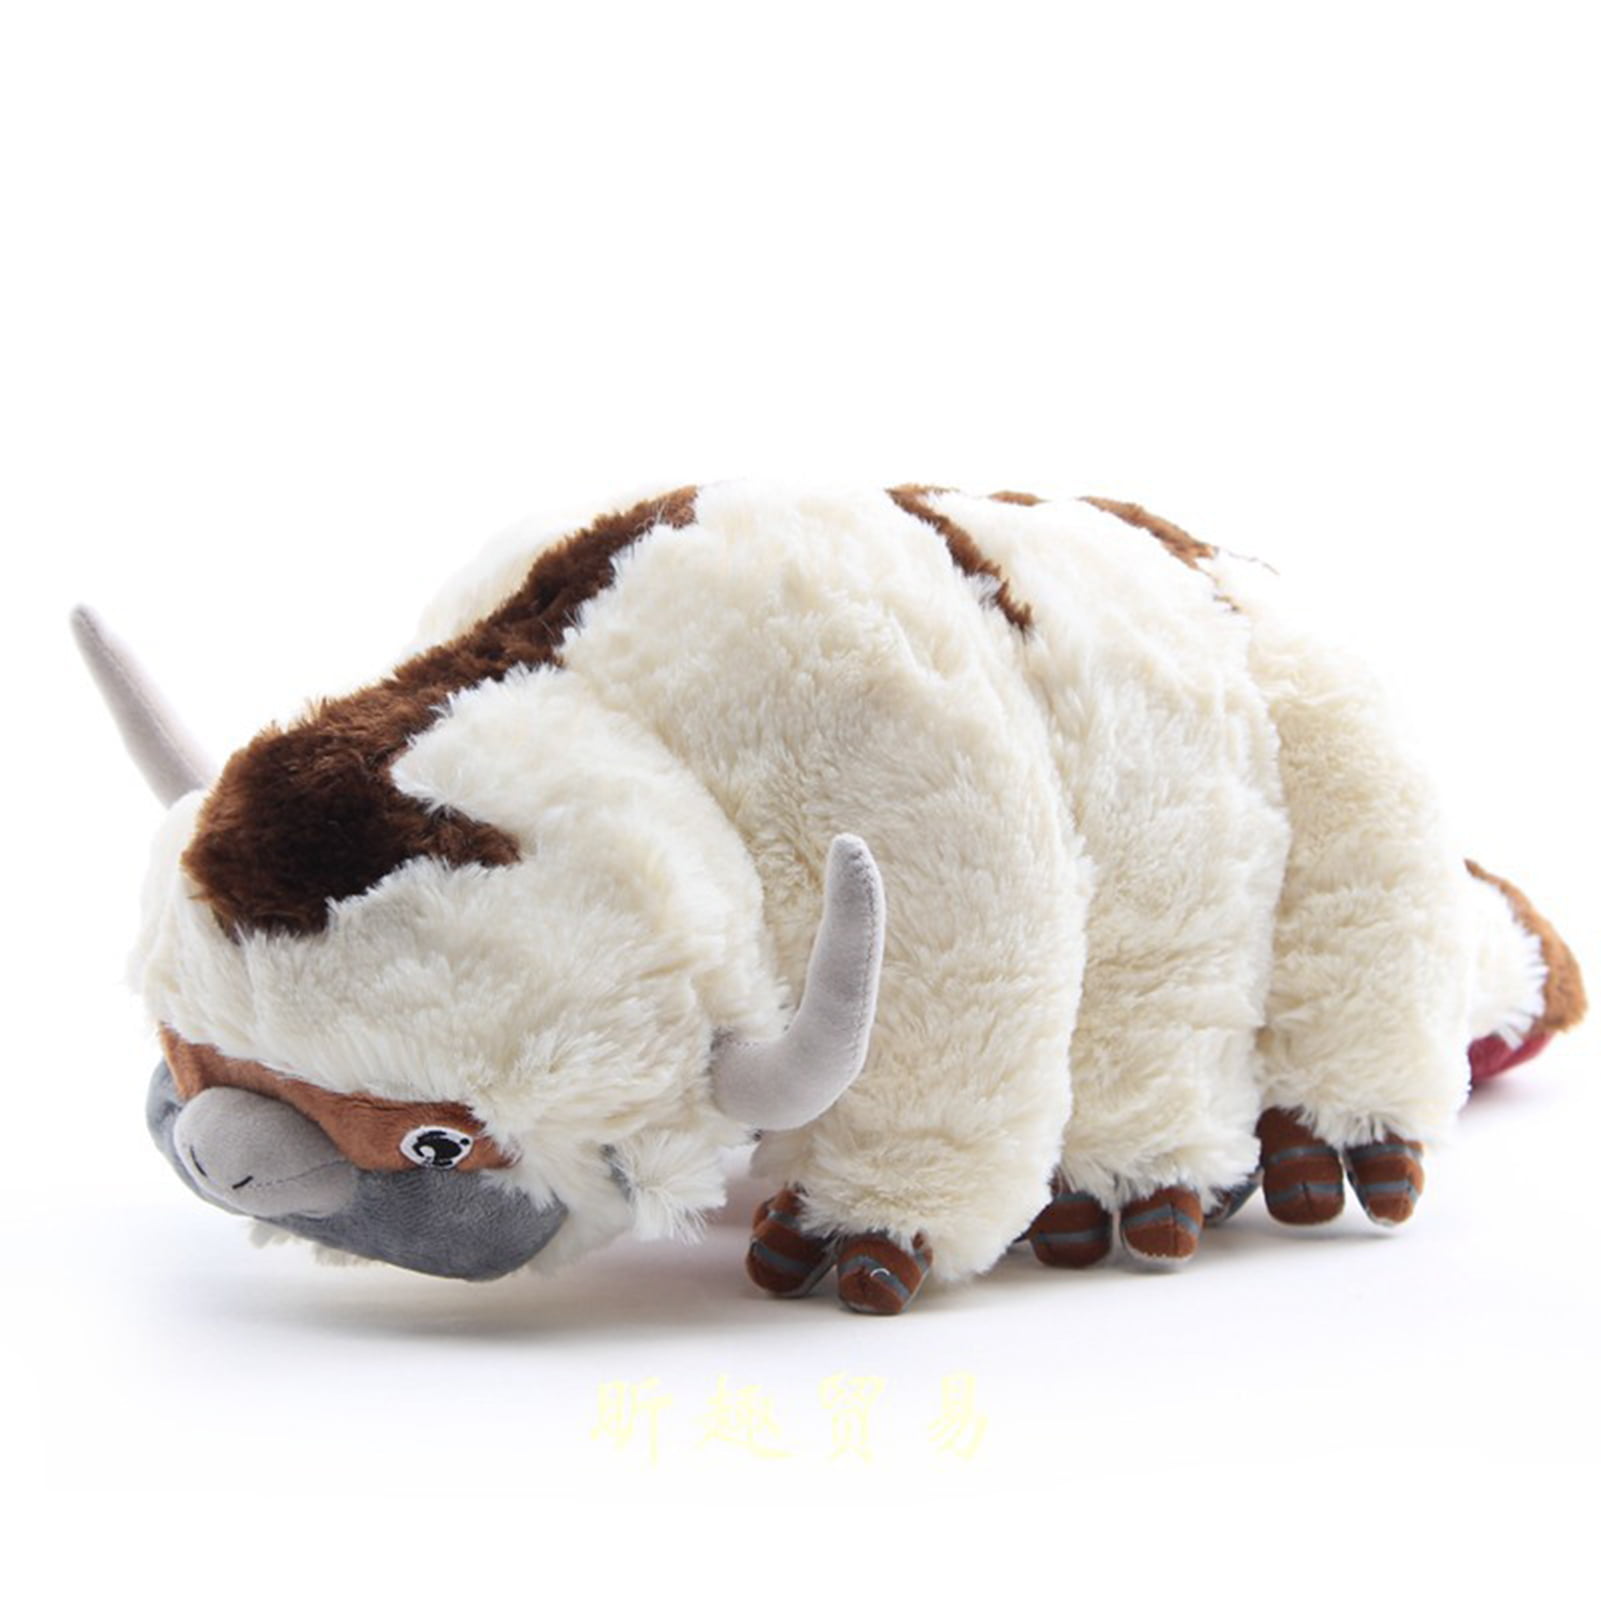 The Last Airbender Appa Avatar and Momo Plush Doll Stuffed Animal Soft Toy Gift